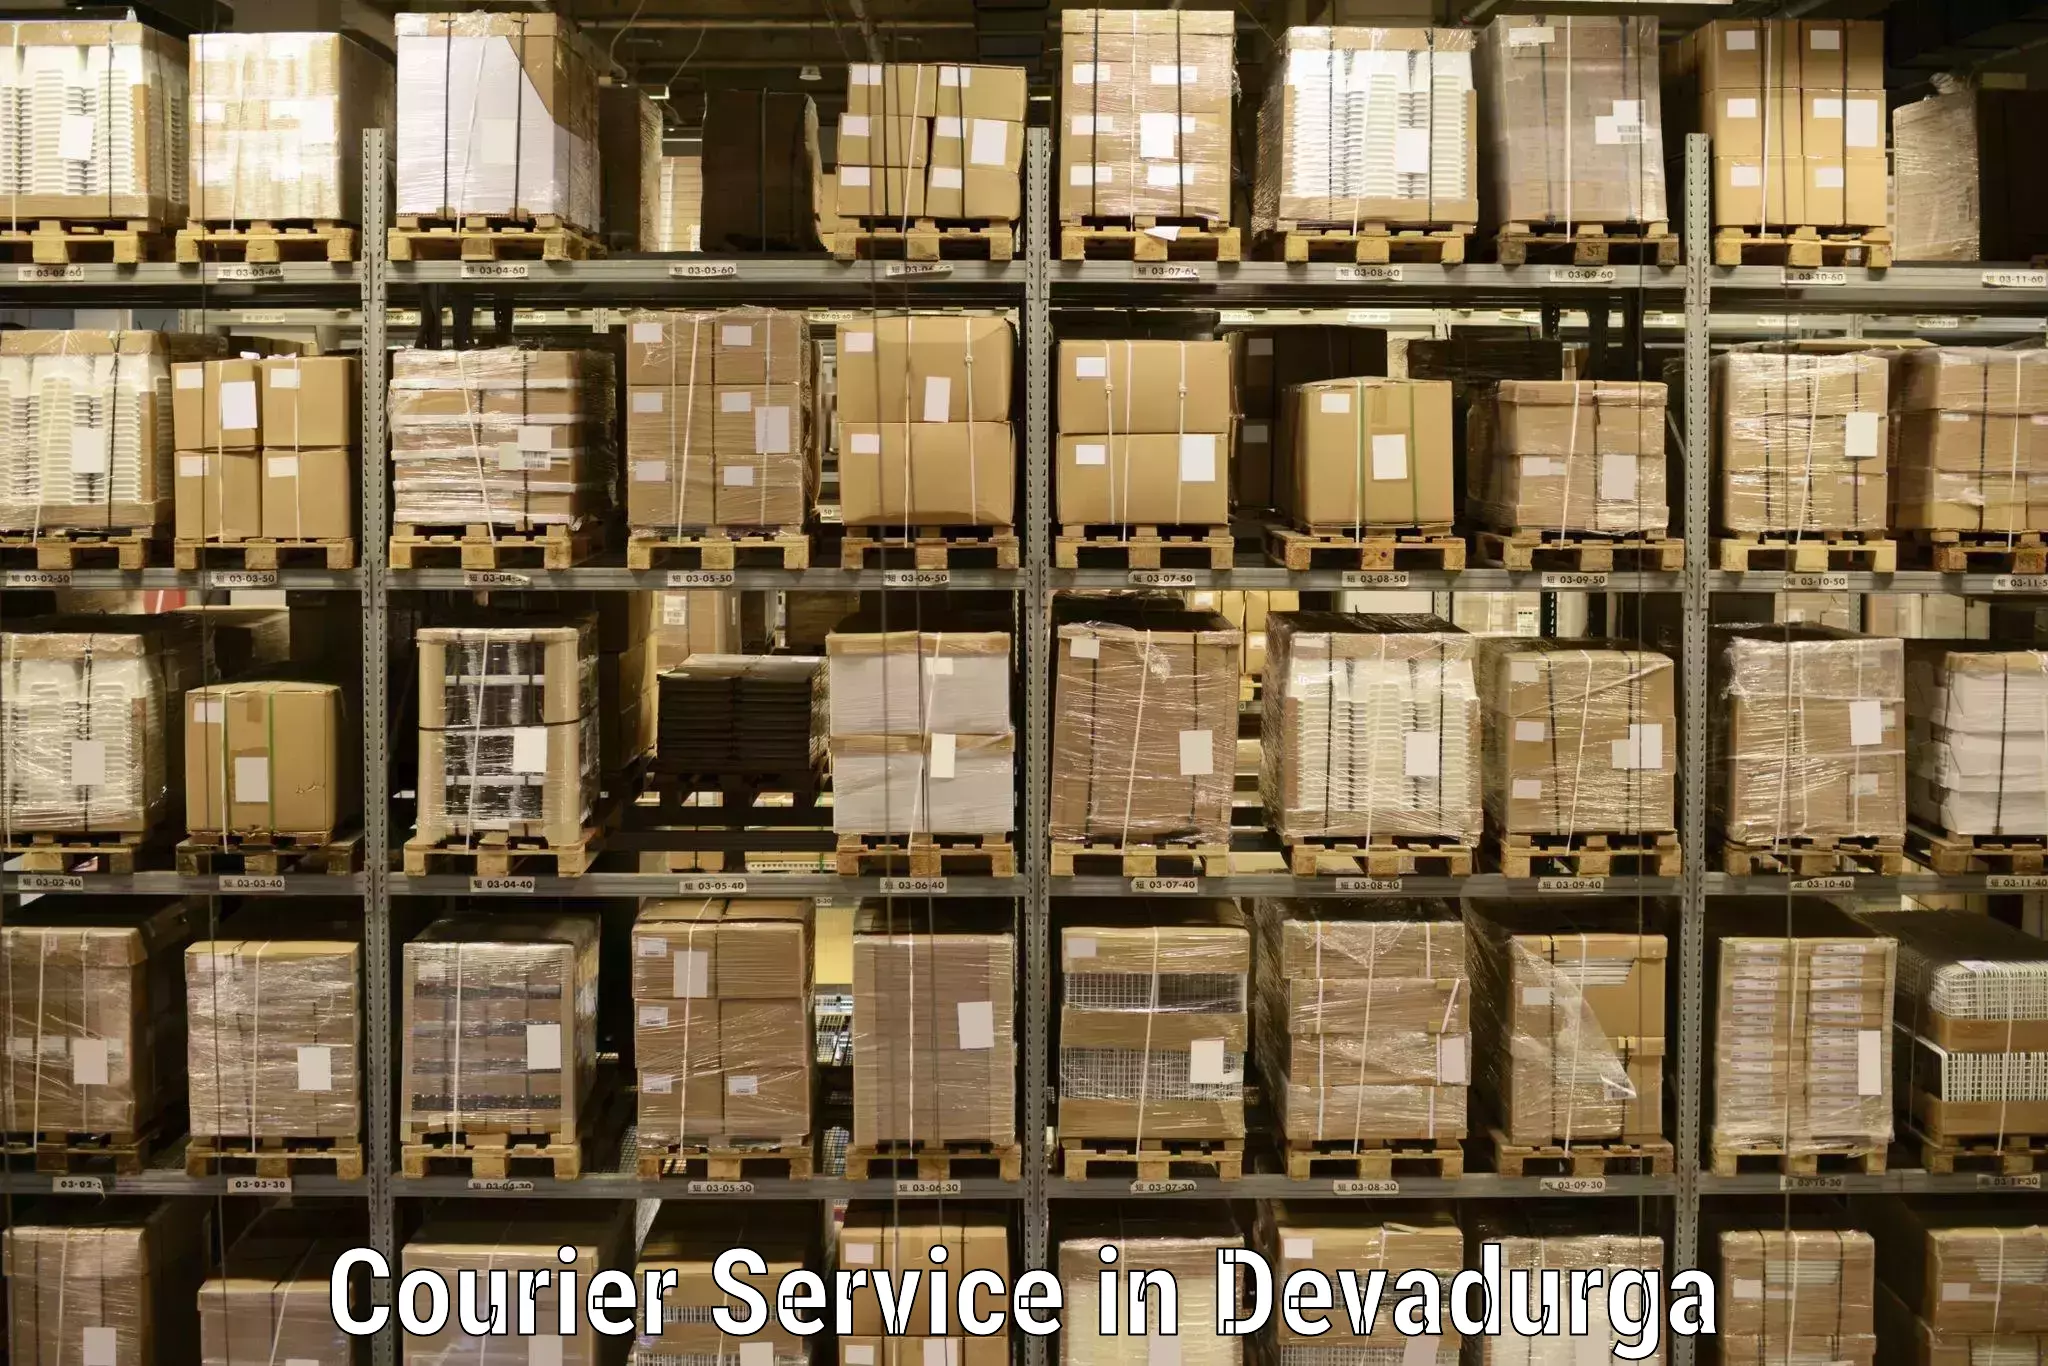 Next-day delivery options in Devadurga